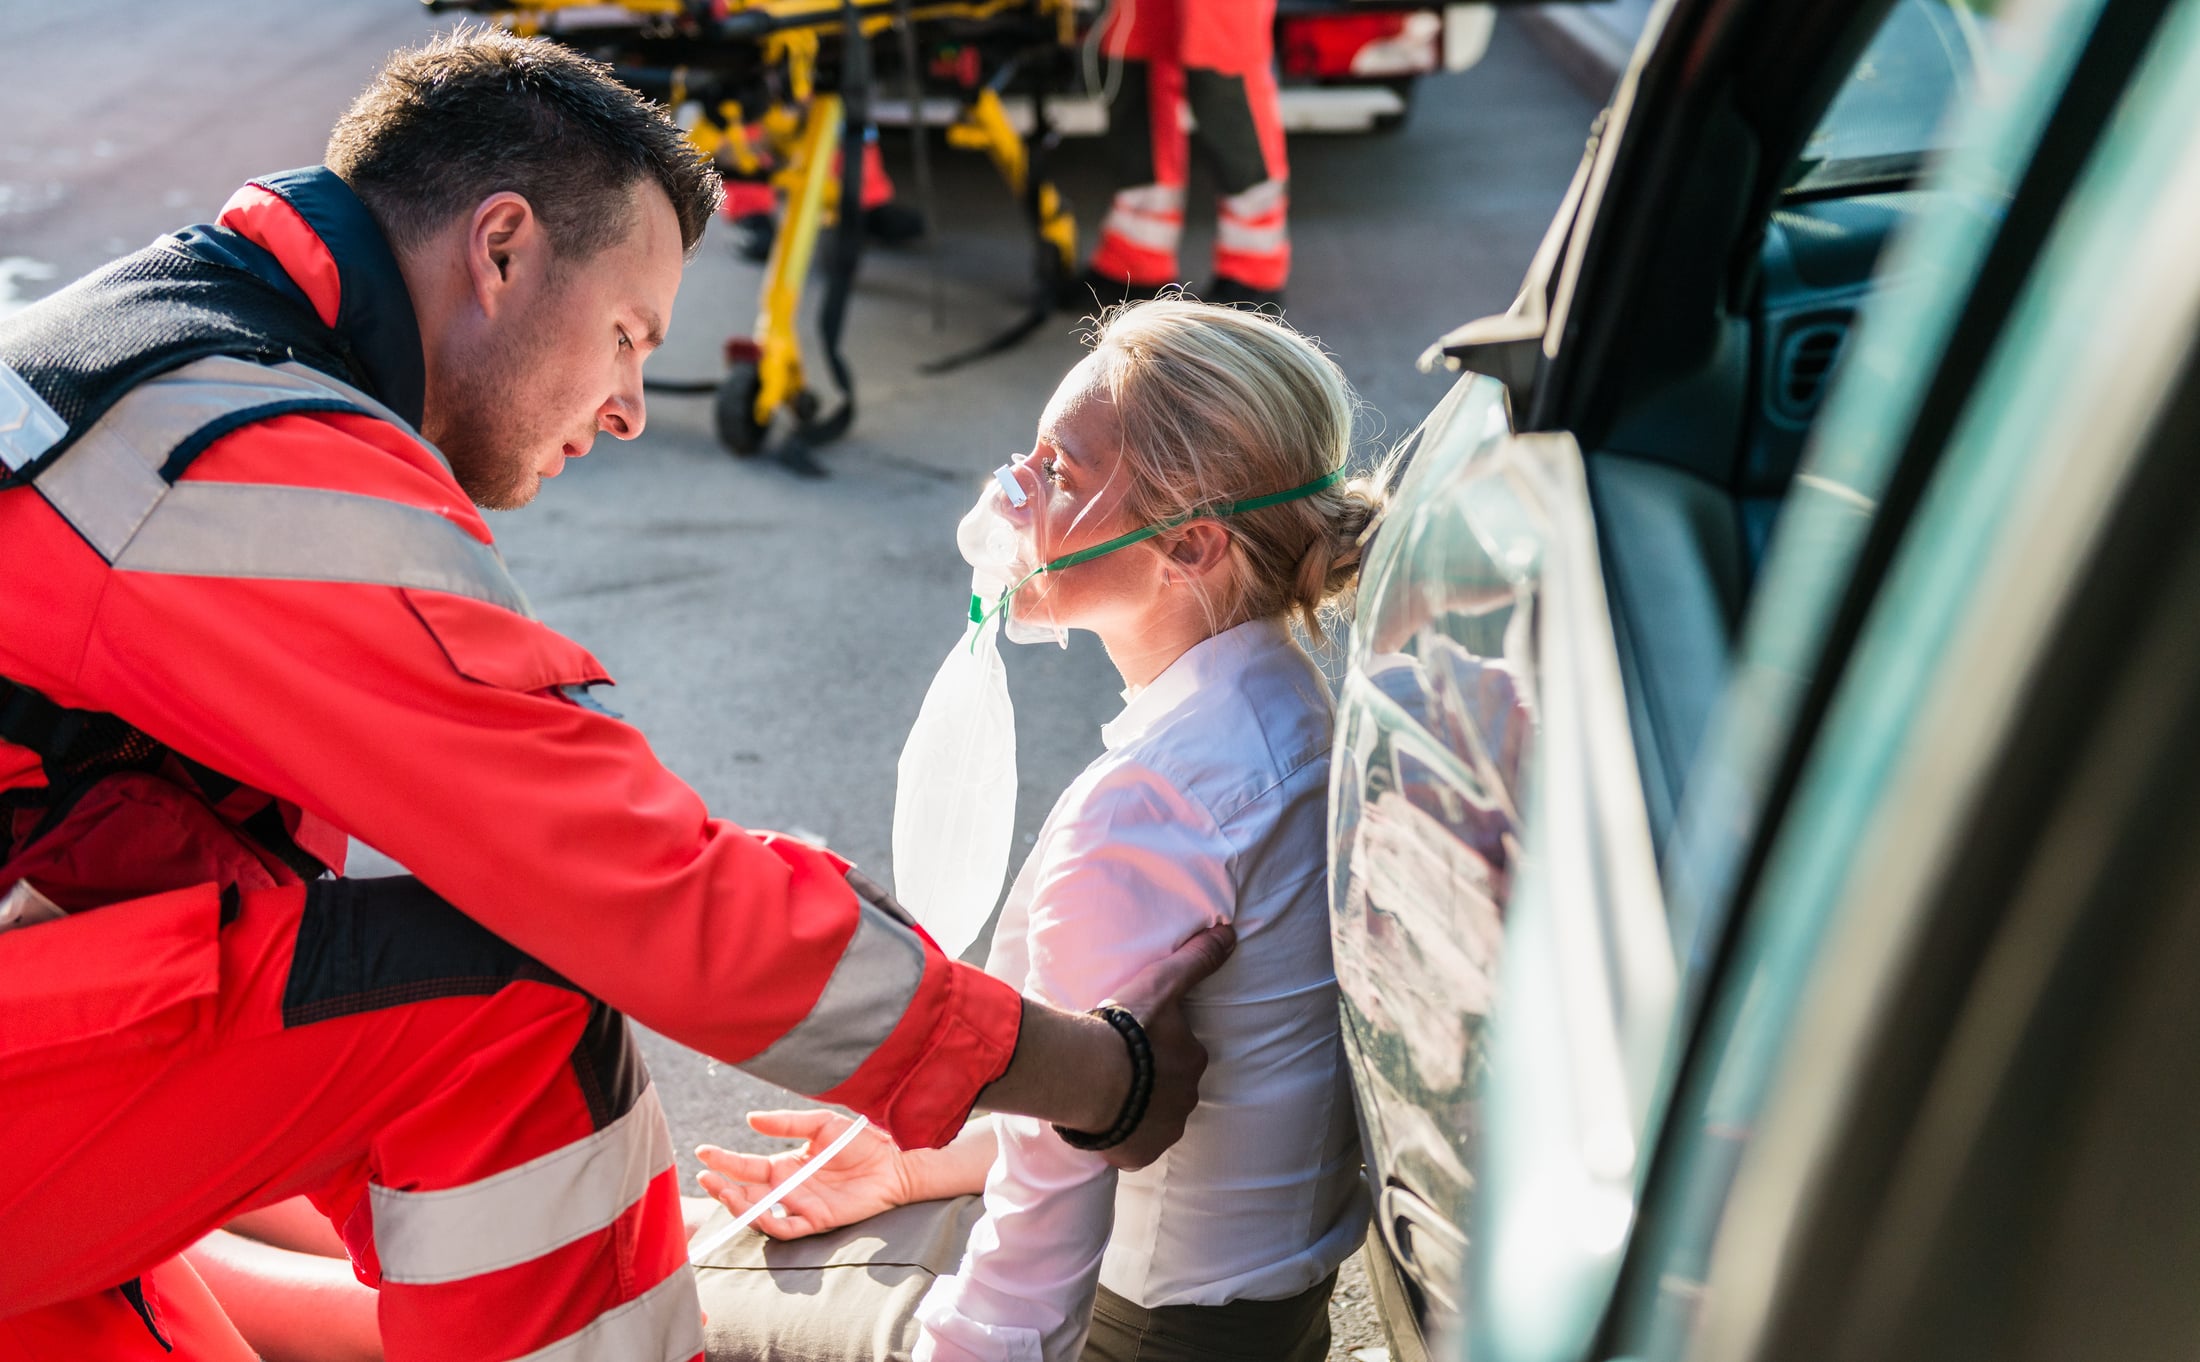 A woman being treated by an EMT after a truck accident.